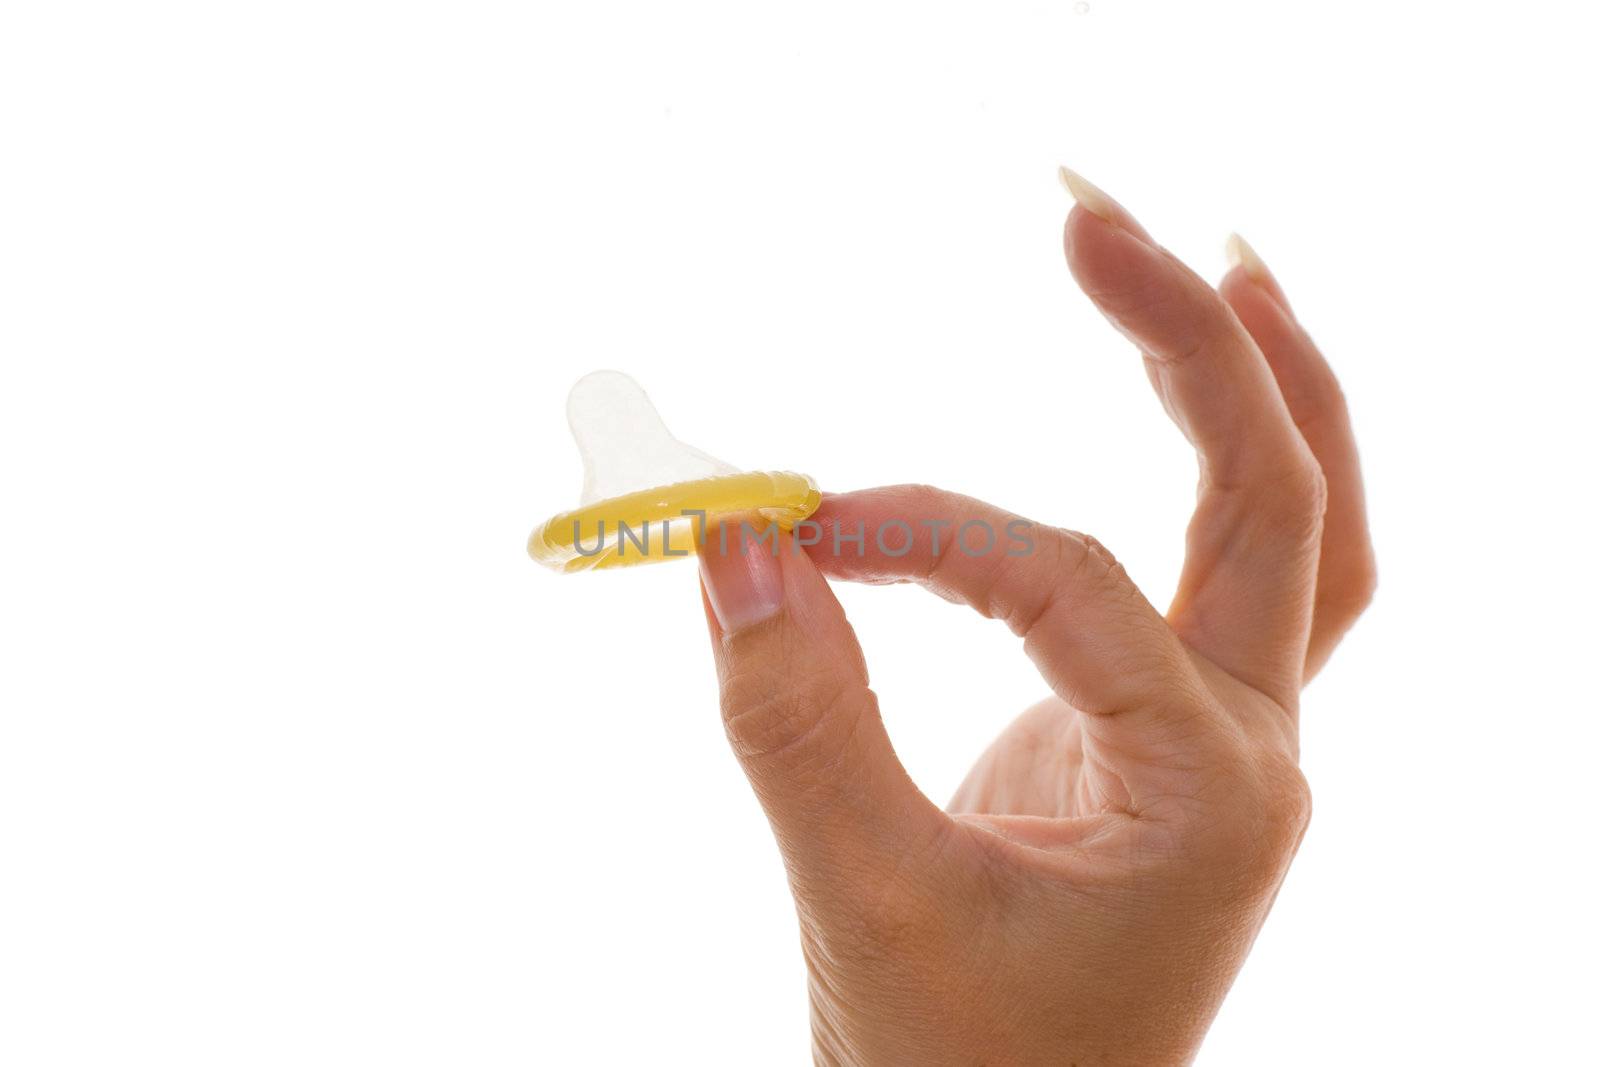 Studio photo of a womans hand holding a condom